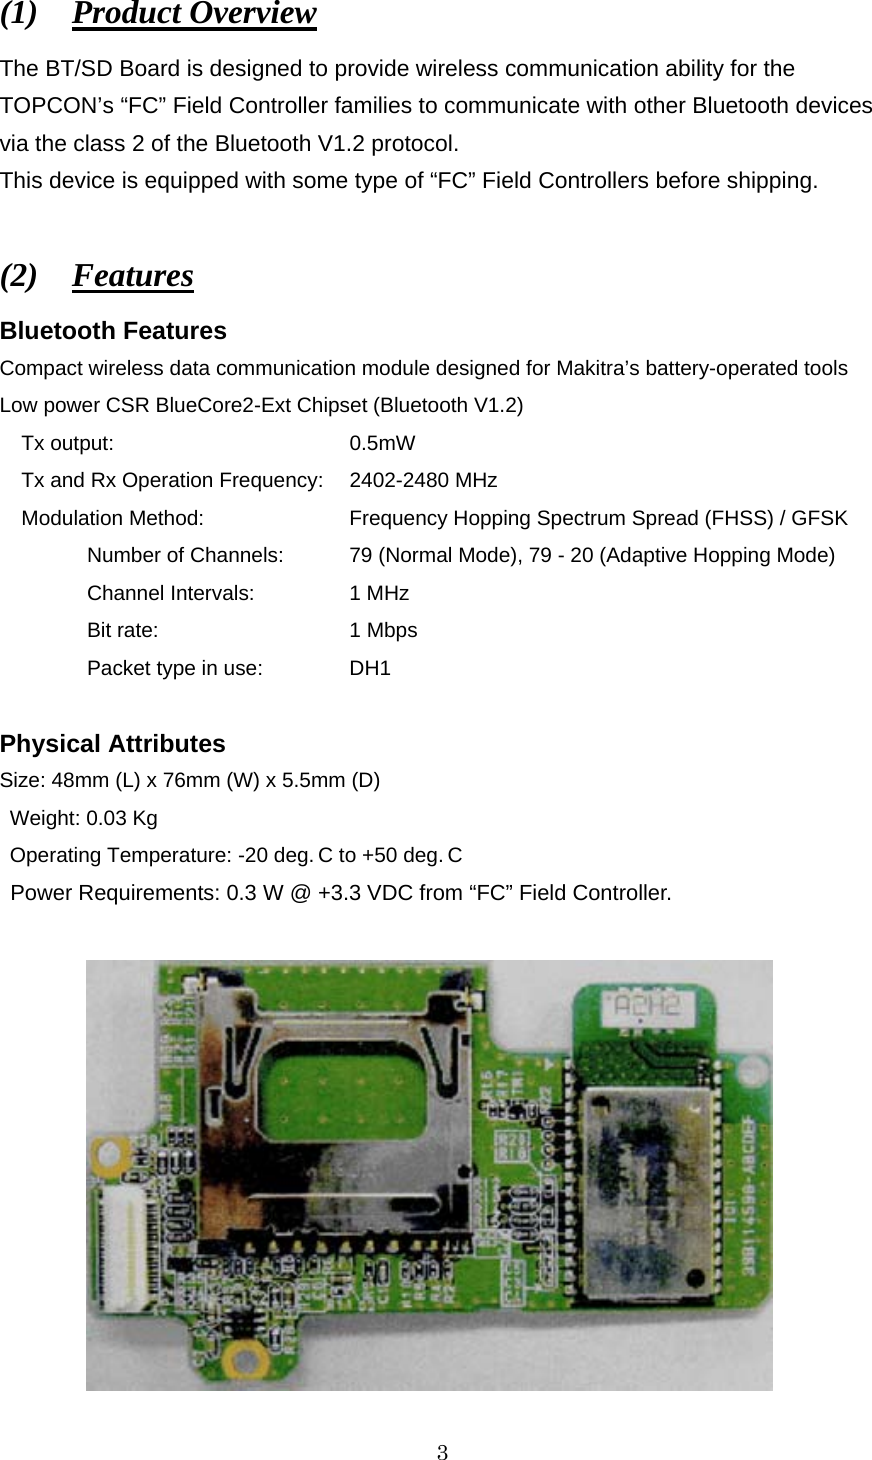   3 (1)  Product Overview The BT/SD Board is designed to provide wireless communication ability for the TOPCON’s “FC” Field Controller families to communicate with other Bluetooth devices via the class 2 of the Bluetooth V1.2 protocol.   This device is equipped with some type of “FC” Field Controllers before shipping.    (2)  Features Bluetooth Features Compact wireless data communication module designed for Makitra’s battery-operated tools Low power CSR BlueCore2-Ext Chipset (Bluetooth V1.2) Tx output:           0.5mW Tx and Rx Operation Frequency:   2402-2480 MHz Modulation Method:    Frequency Hopping Spectrum Spread (FHSS) / GFSK   Number of Channels:  79 (Normal Mode), 79 - 20 (Adaptive Hopping Mode)   Channel Intervals:   1 MHz    Bit rate:   1 Mbps   Packet type in use:  DH1  Physical Attributes Size: 48mm (L) x 76mm (W) x 5.5mm (D)  Weight: 0.03 Kg  Operating Temperature: -20 deg. C to +50 deg. C  Power Requirements: 0.3 W @ +3.3 VDC from “FC” Field Controller.    